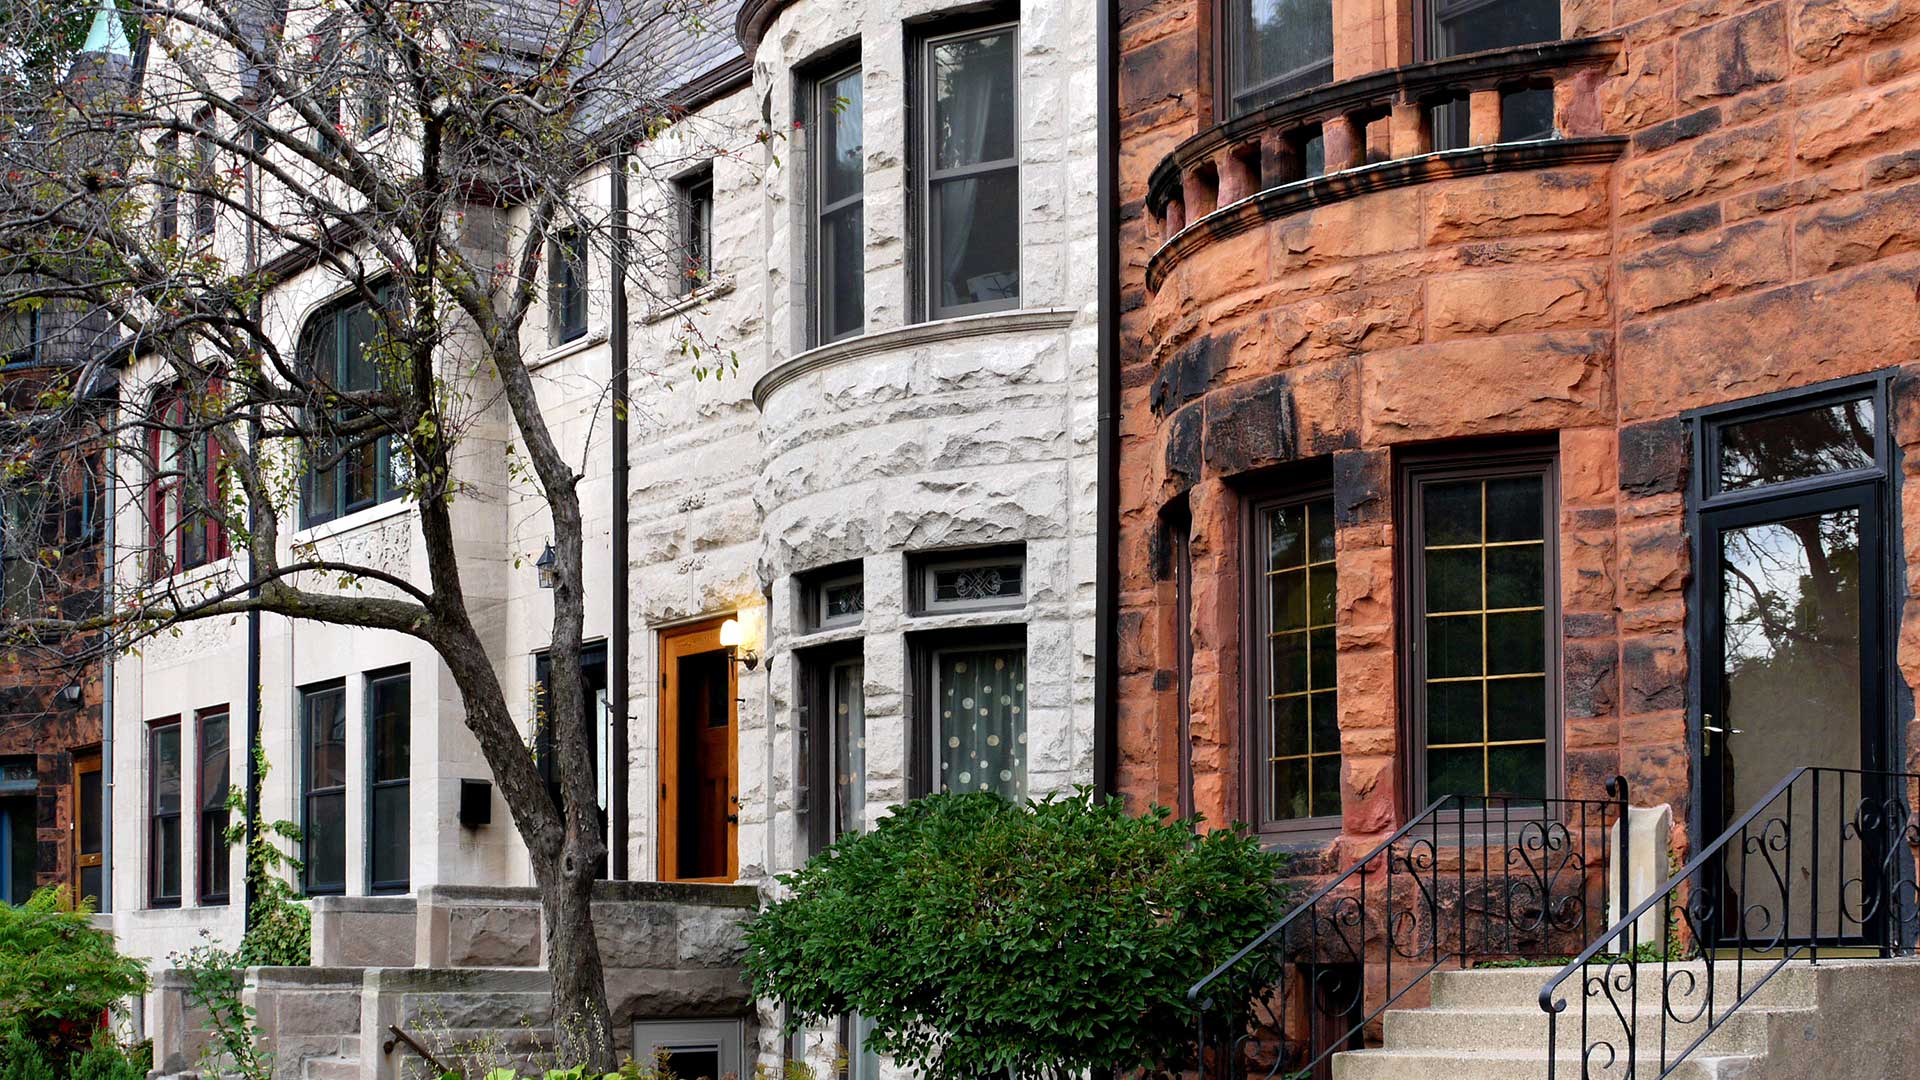 Old Chicago stone walk-up homes along a tree-lined street.